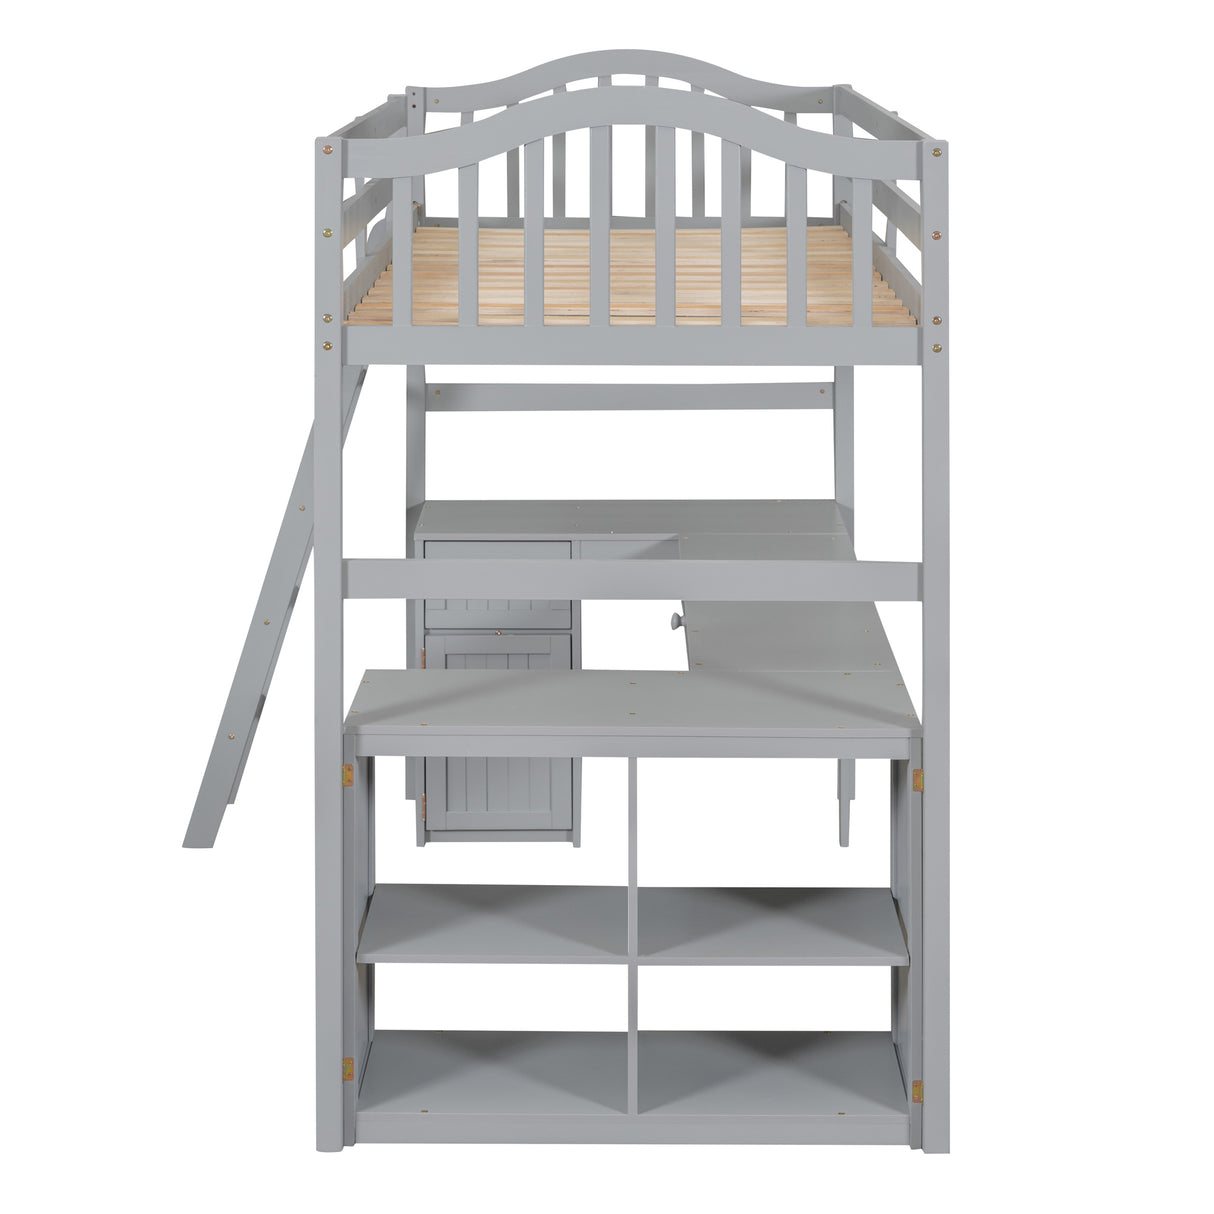 Twin size Loft Bed with Drawers, Cabinet, Shelves and Desk, Wooden Loft Bed with Desk - Gray(OLD SKU :LT000505AAE) - Home Elegance USA